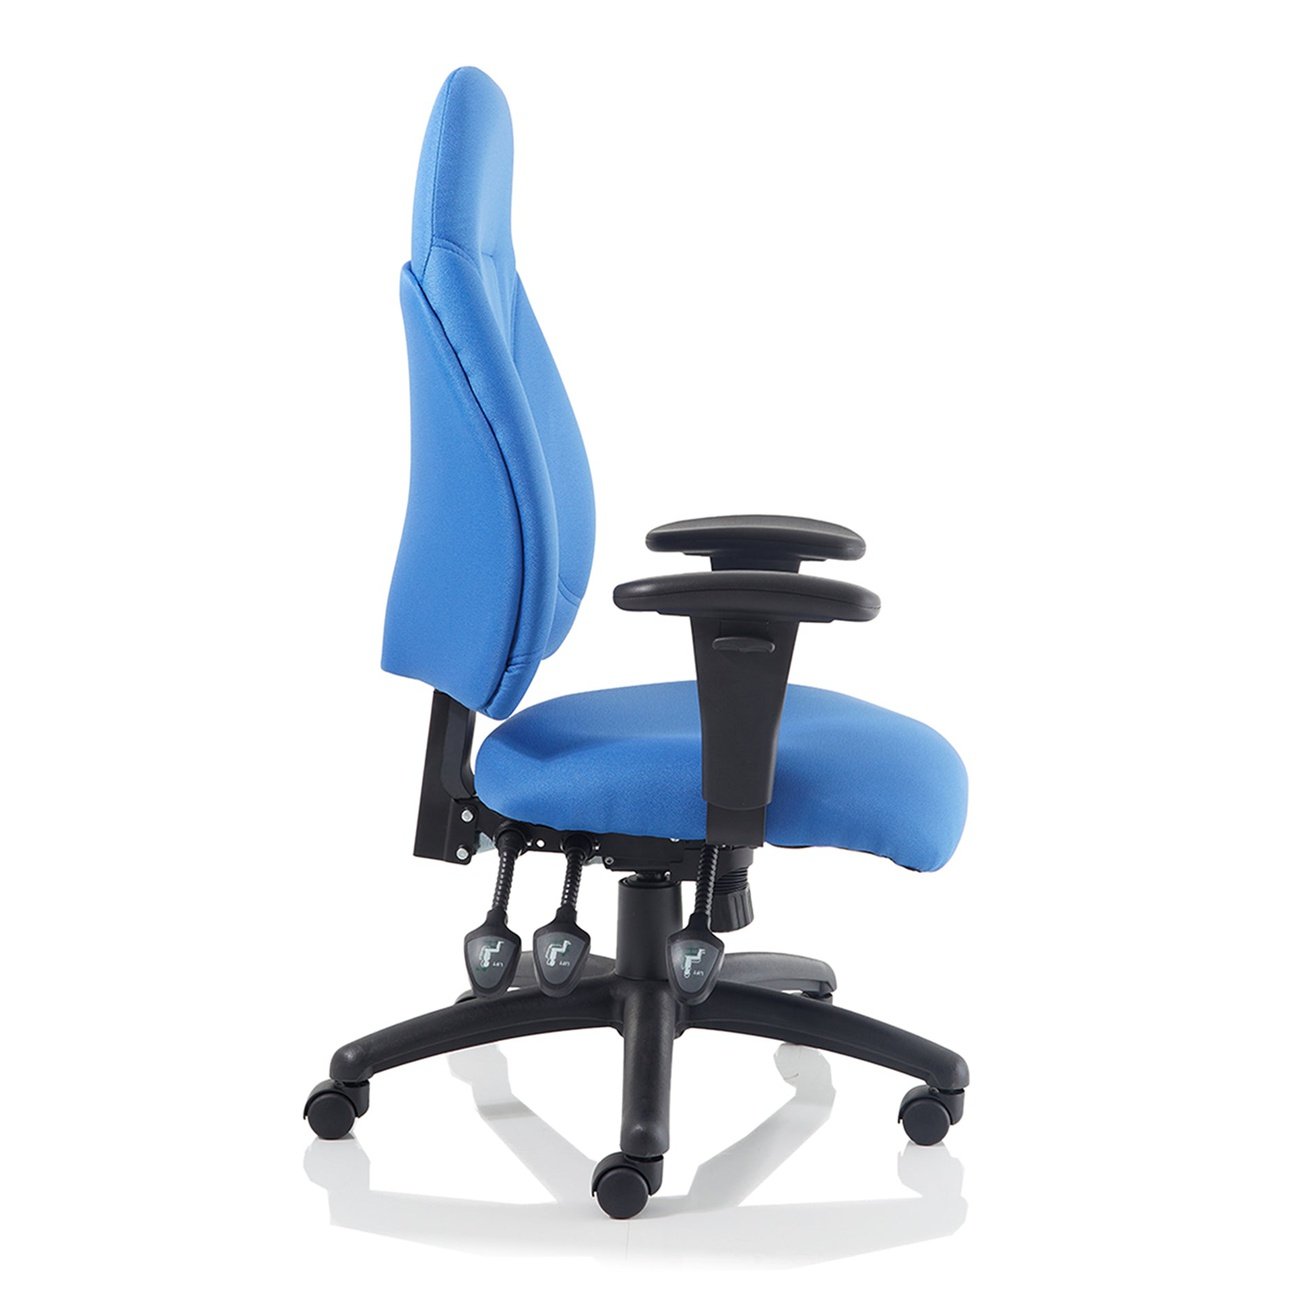 Esme High Back Task Operator Chair with Arms - Fabric Seat & Back, Adjustable Height, 125kg Capacity, 8hr Usage, 2yr Warranty (Flat Packed)